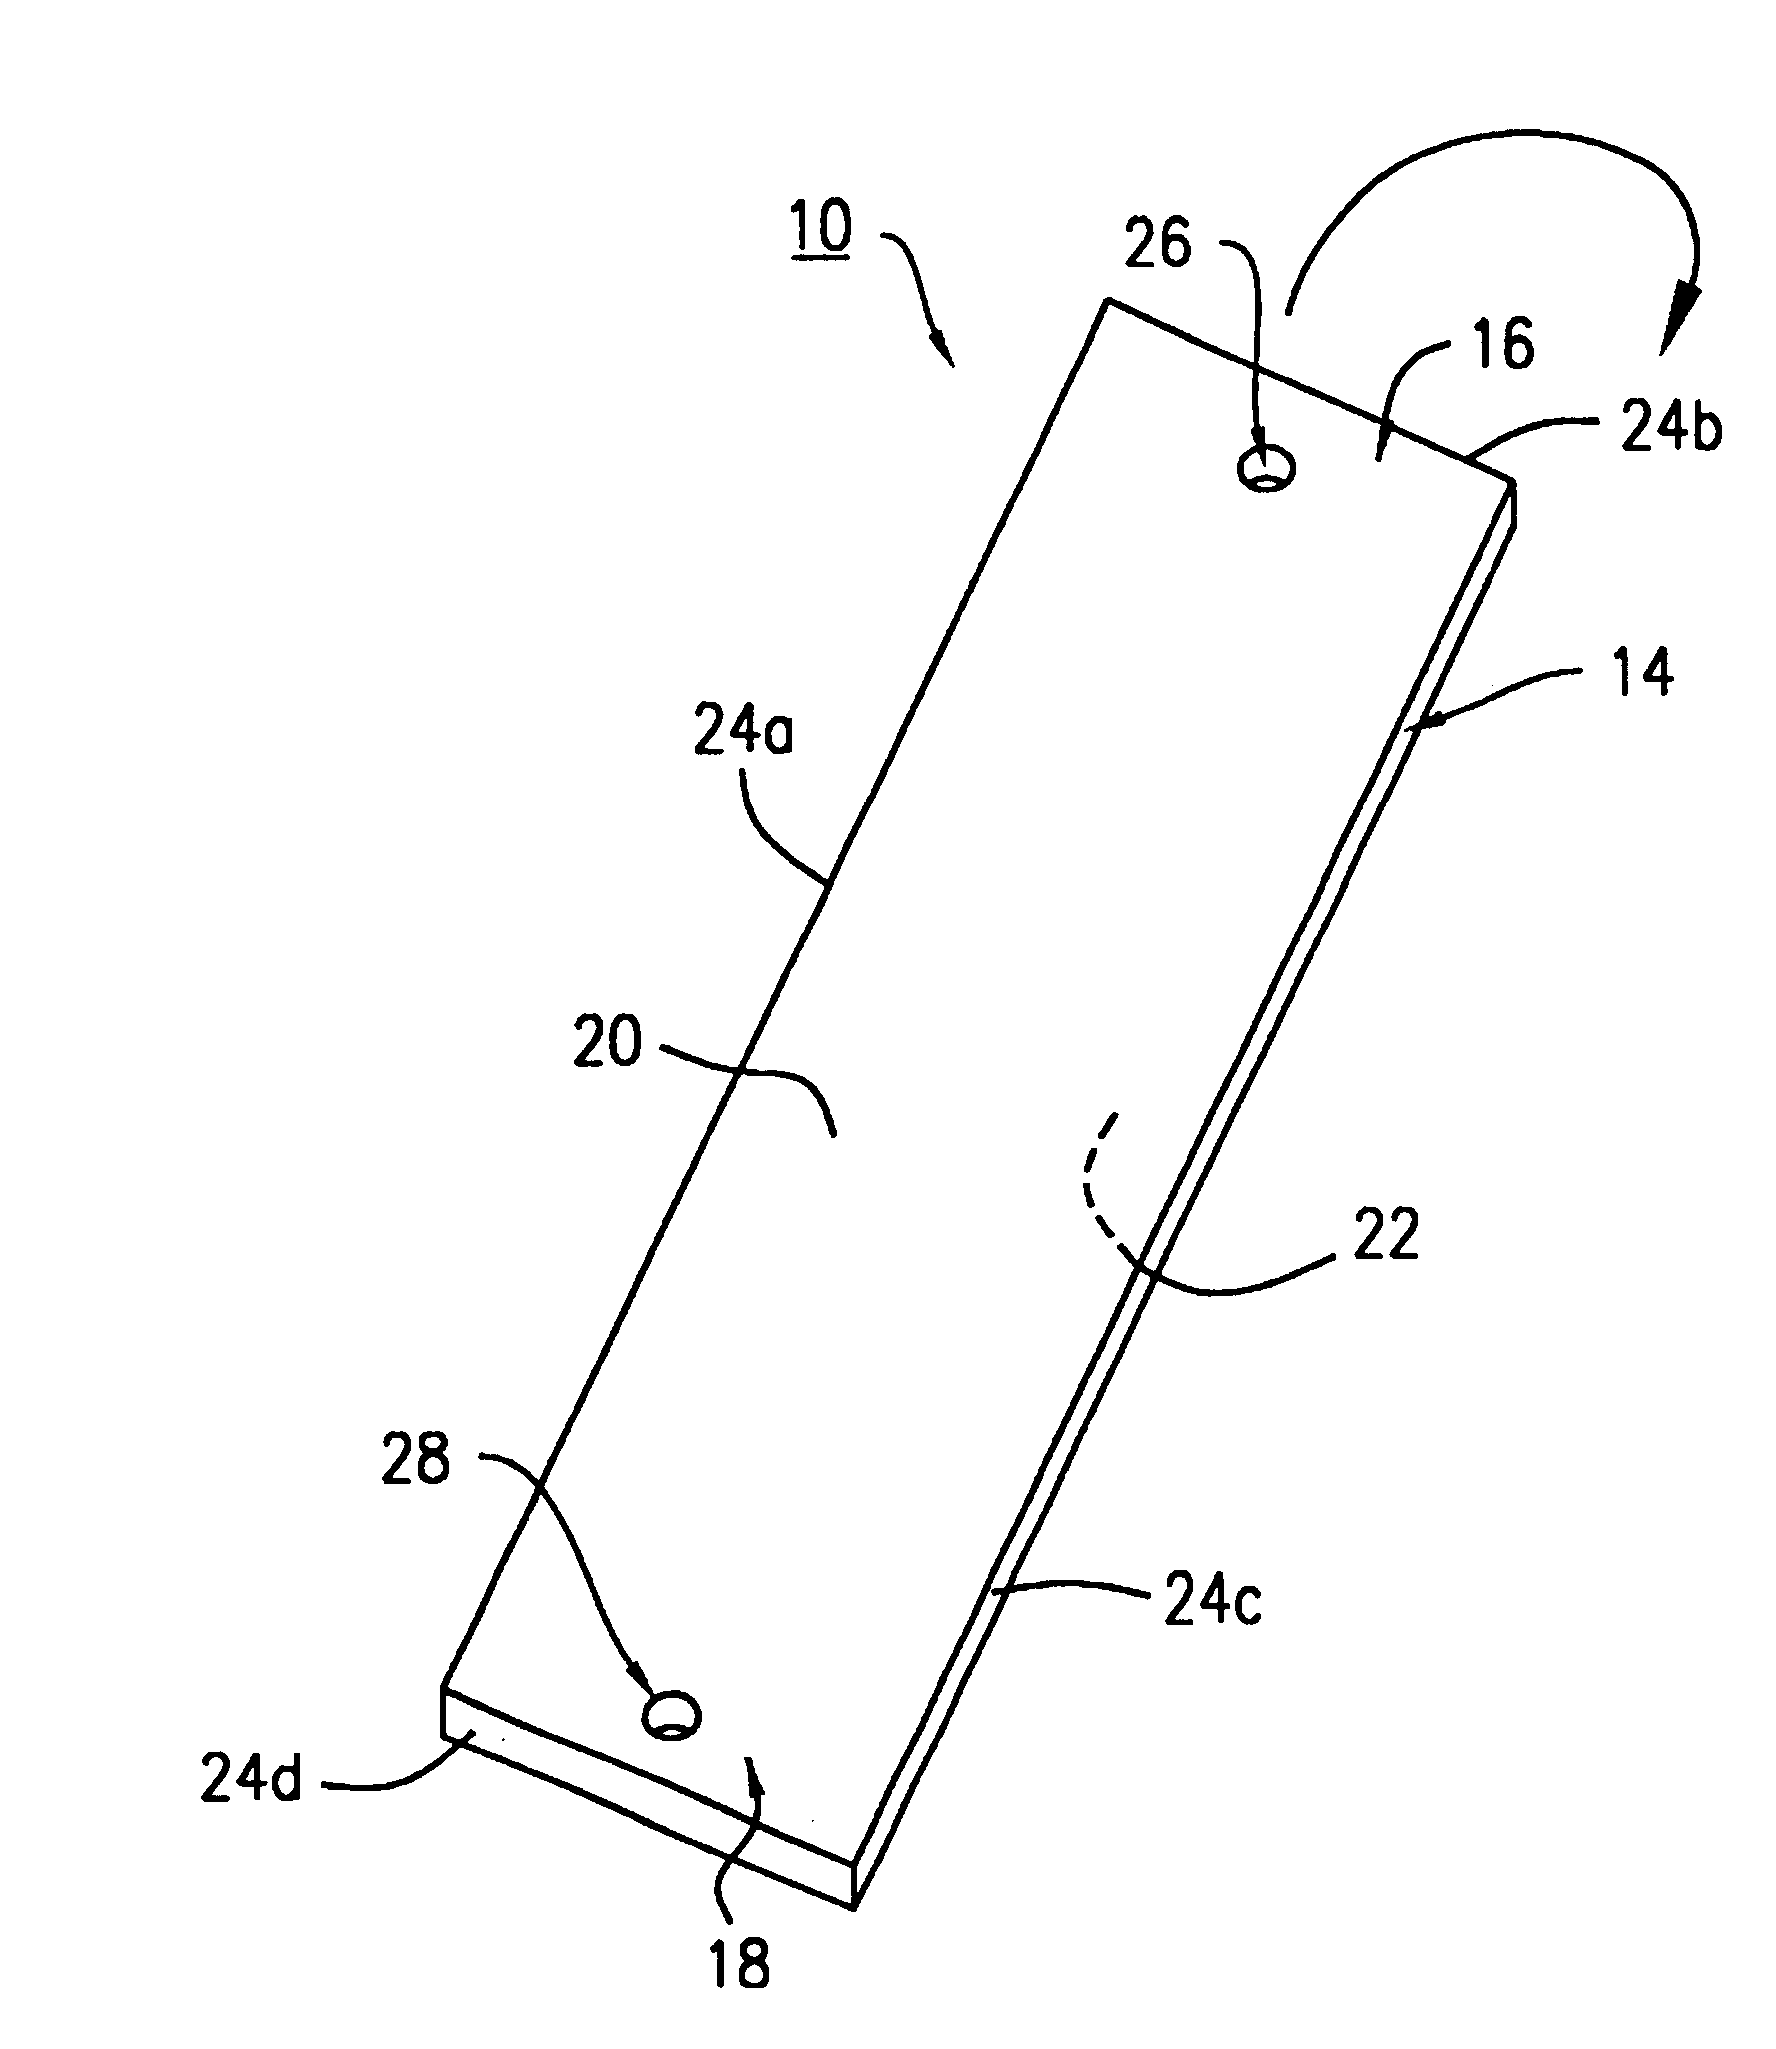 Suture anchoring and tensioning device